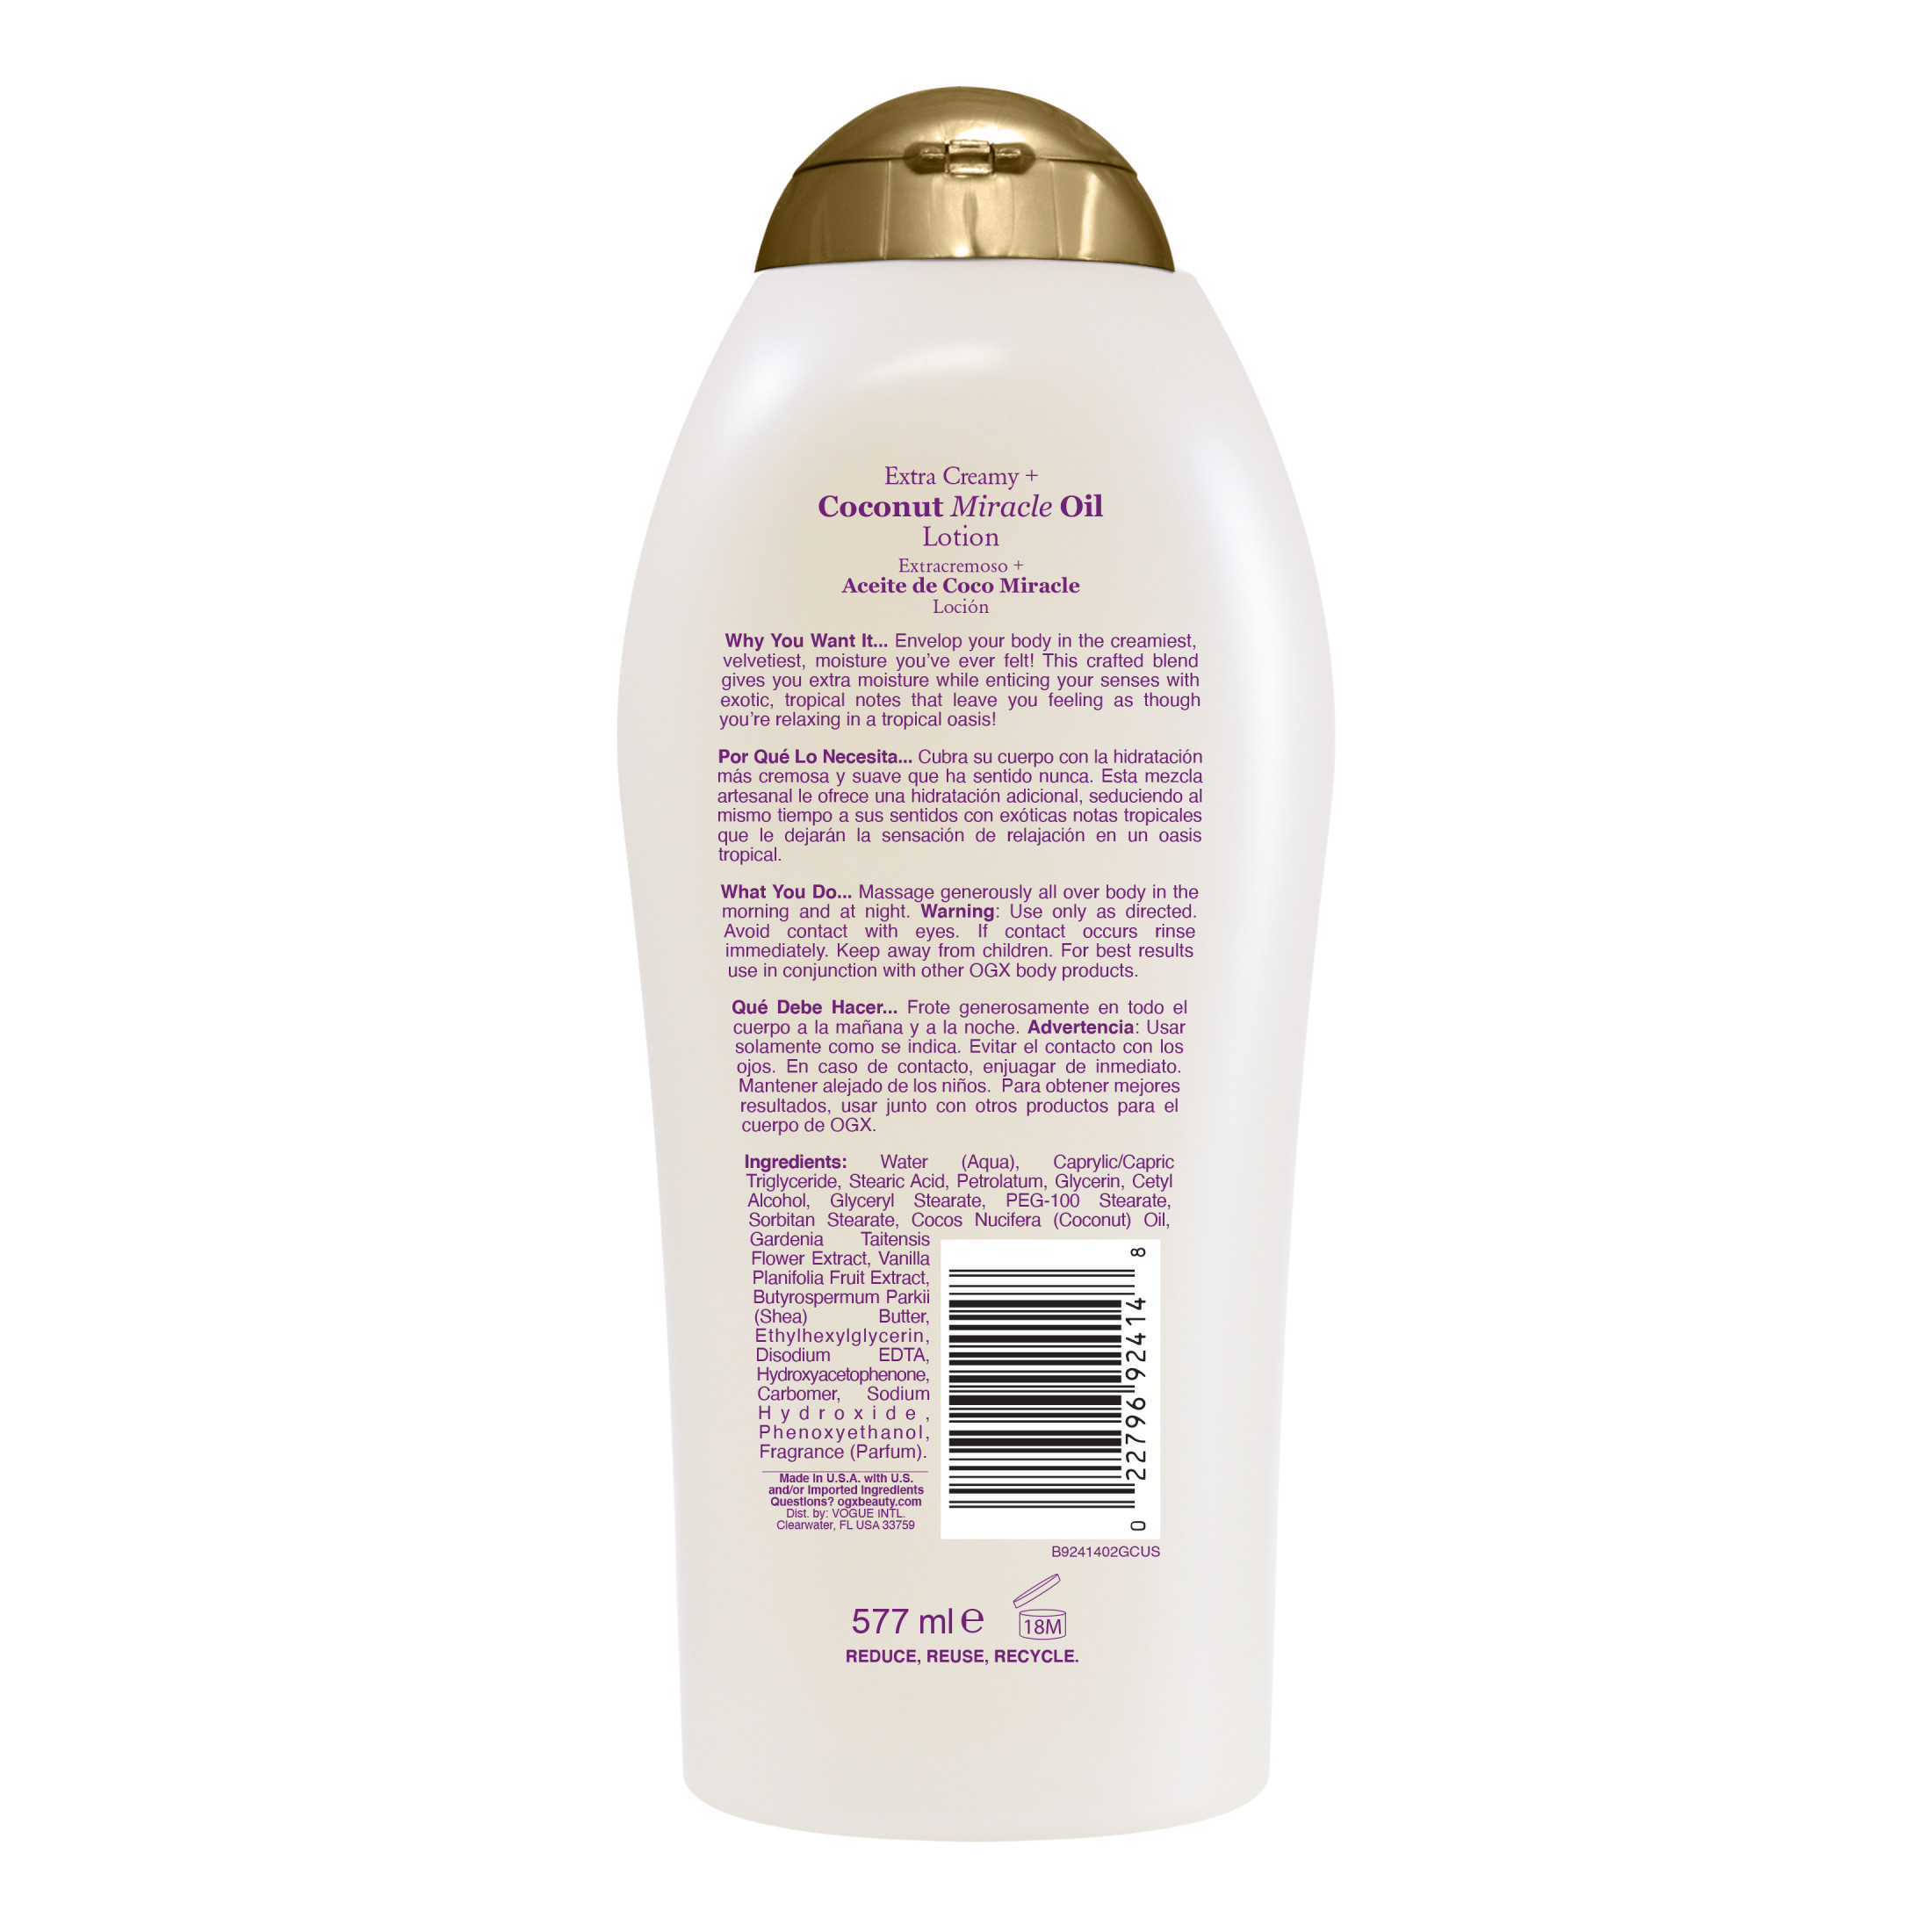 Extra Creamy + Coconut Miracle Oil Body Lotion - image 4 of 4